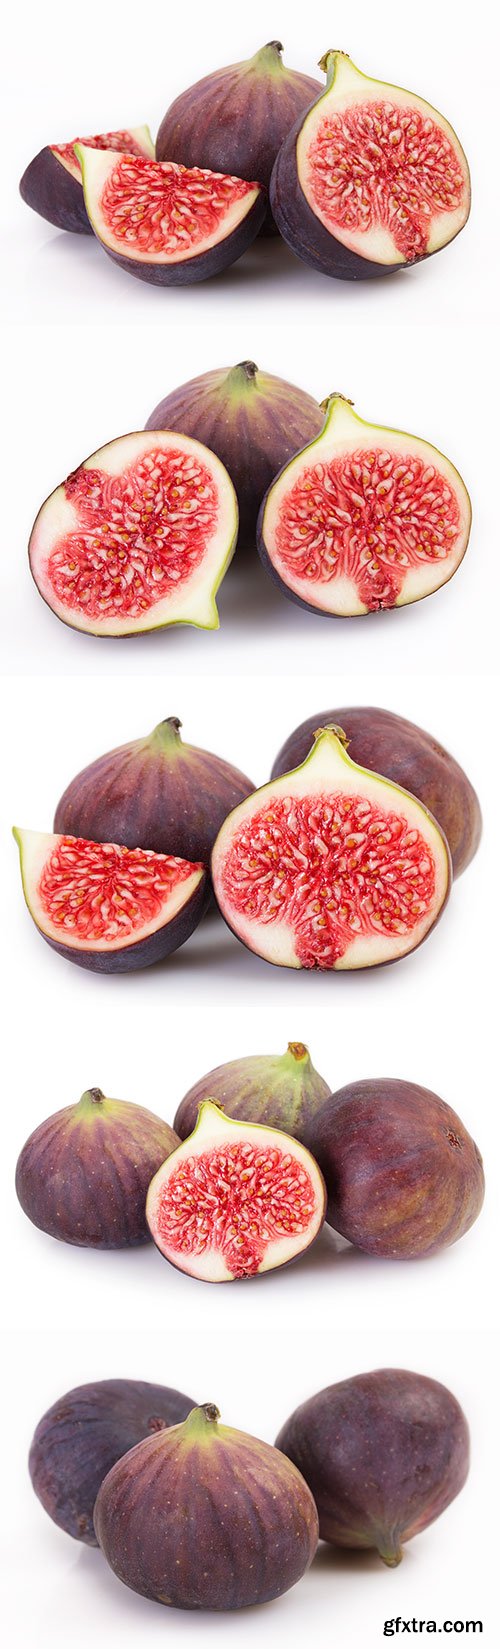 Fresh Figs Isolated - 8xJPGs